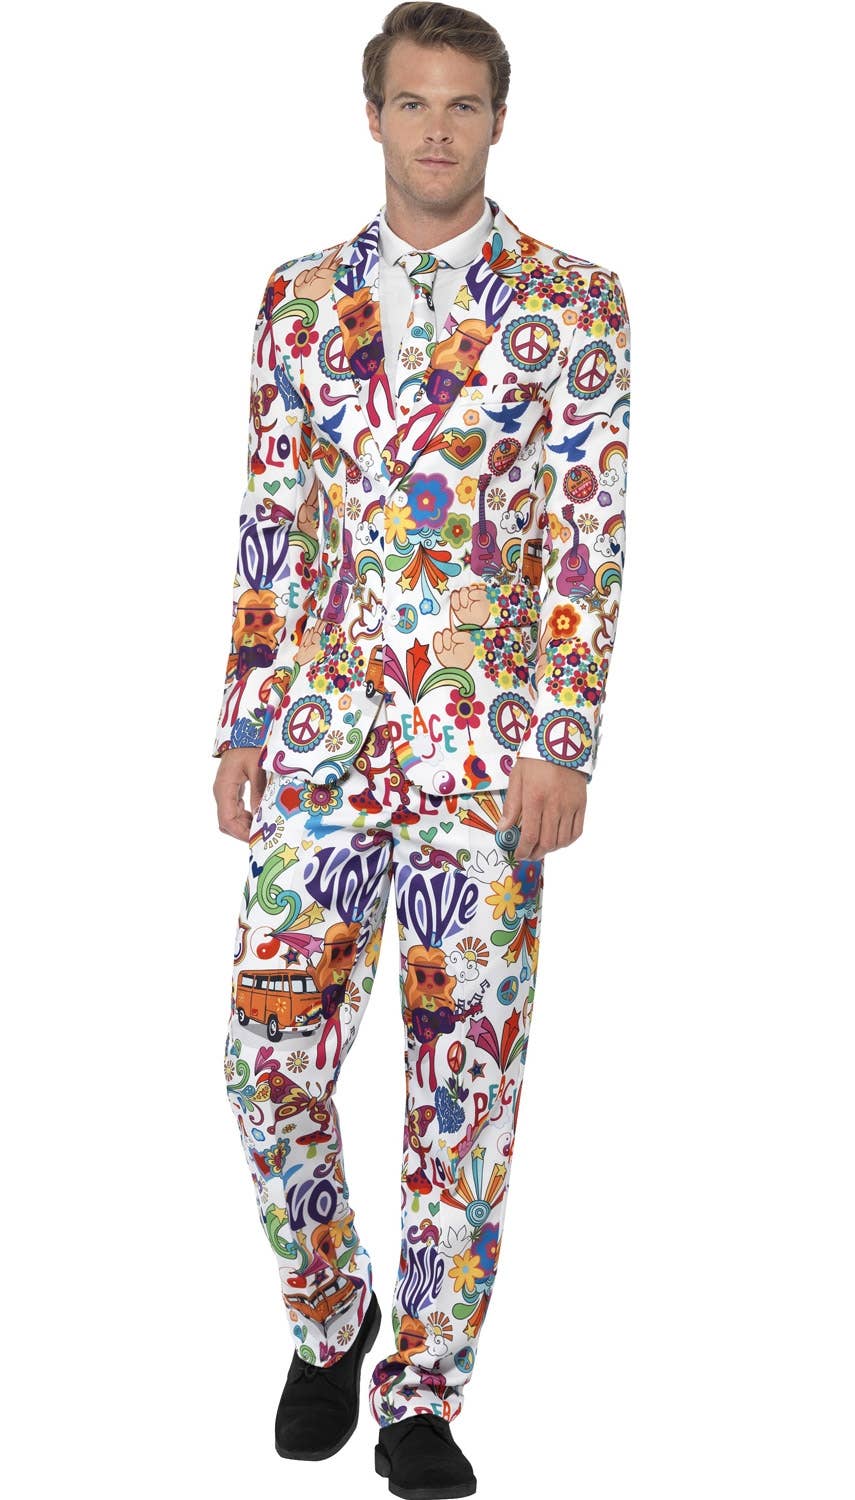 Groovy Print Retro Men's Stand Out 70s Dress Up Suit - Main Image